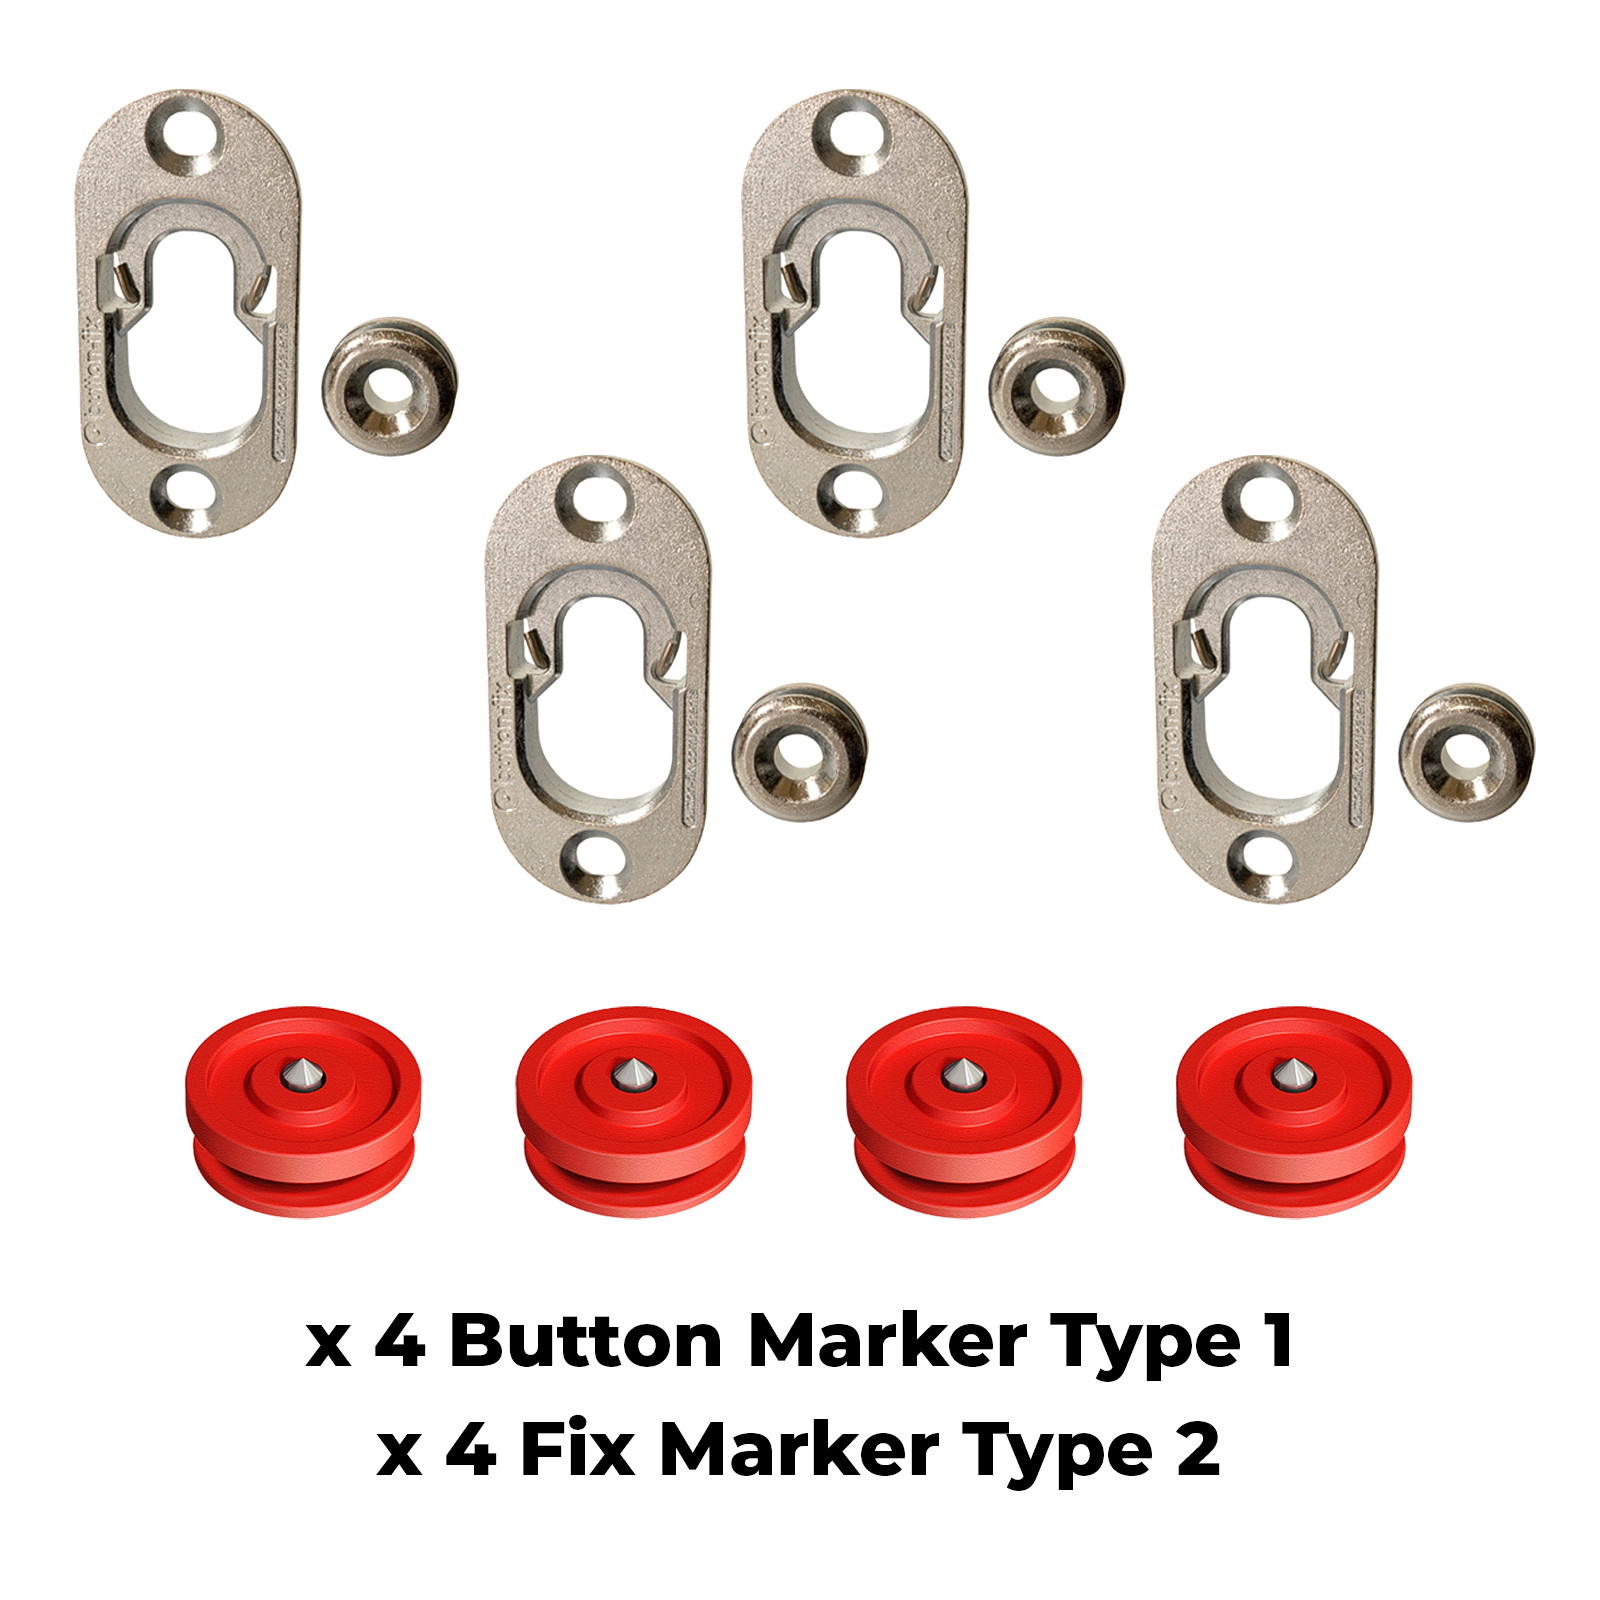 Button Fix Type 1 Metal Fix Bracket Fixing with Stainless Steel Retaining Spring for Fire Retardant Panels, Marine Interiors, Vibration & Shock Tested + Marker Tools x4 + 4 Marker Tool's